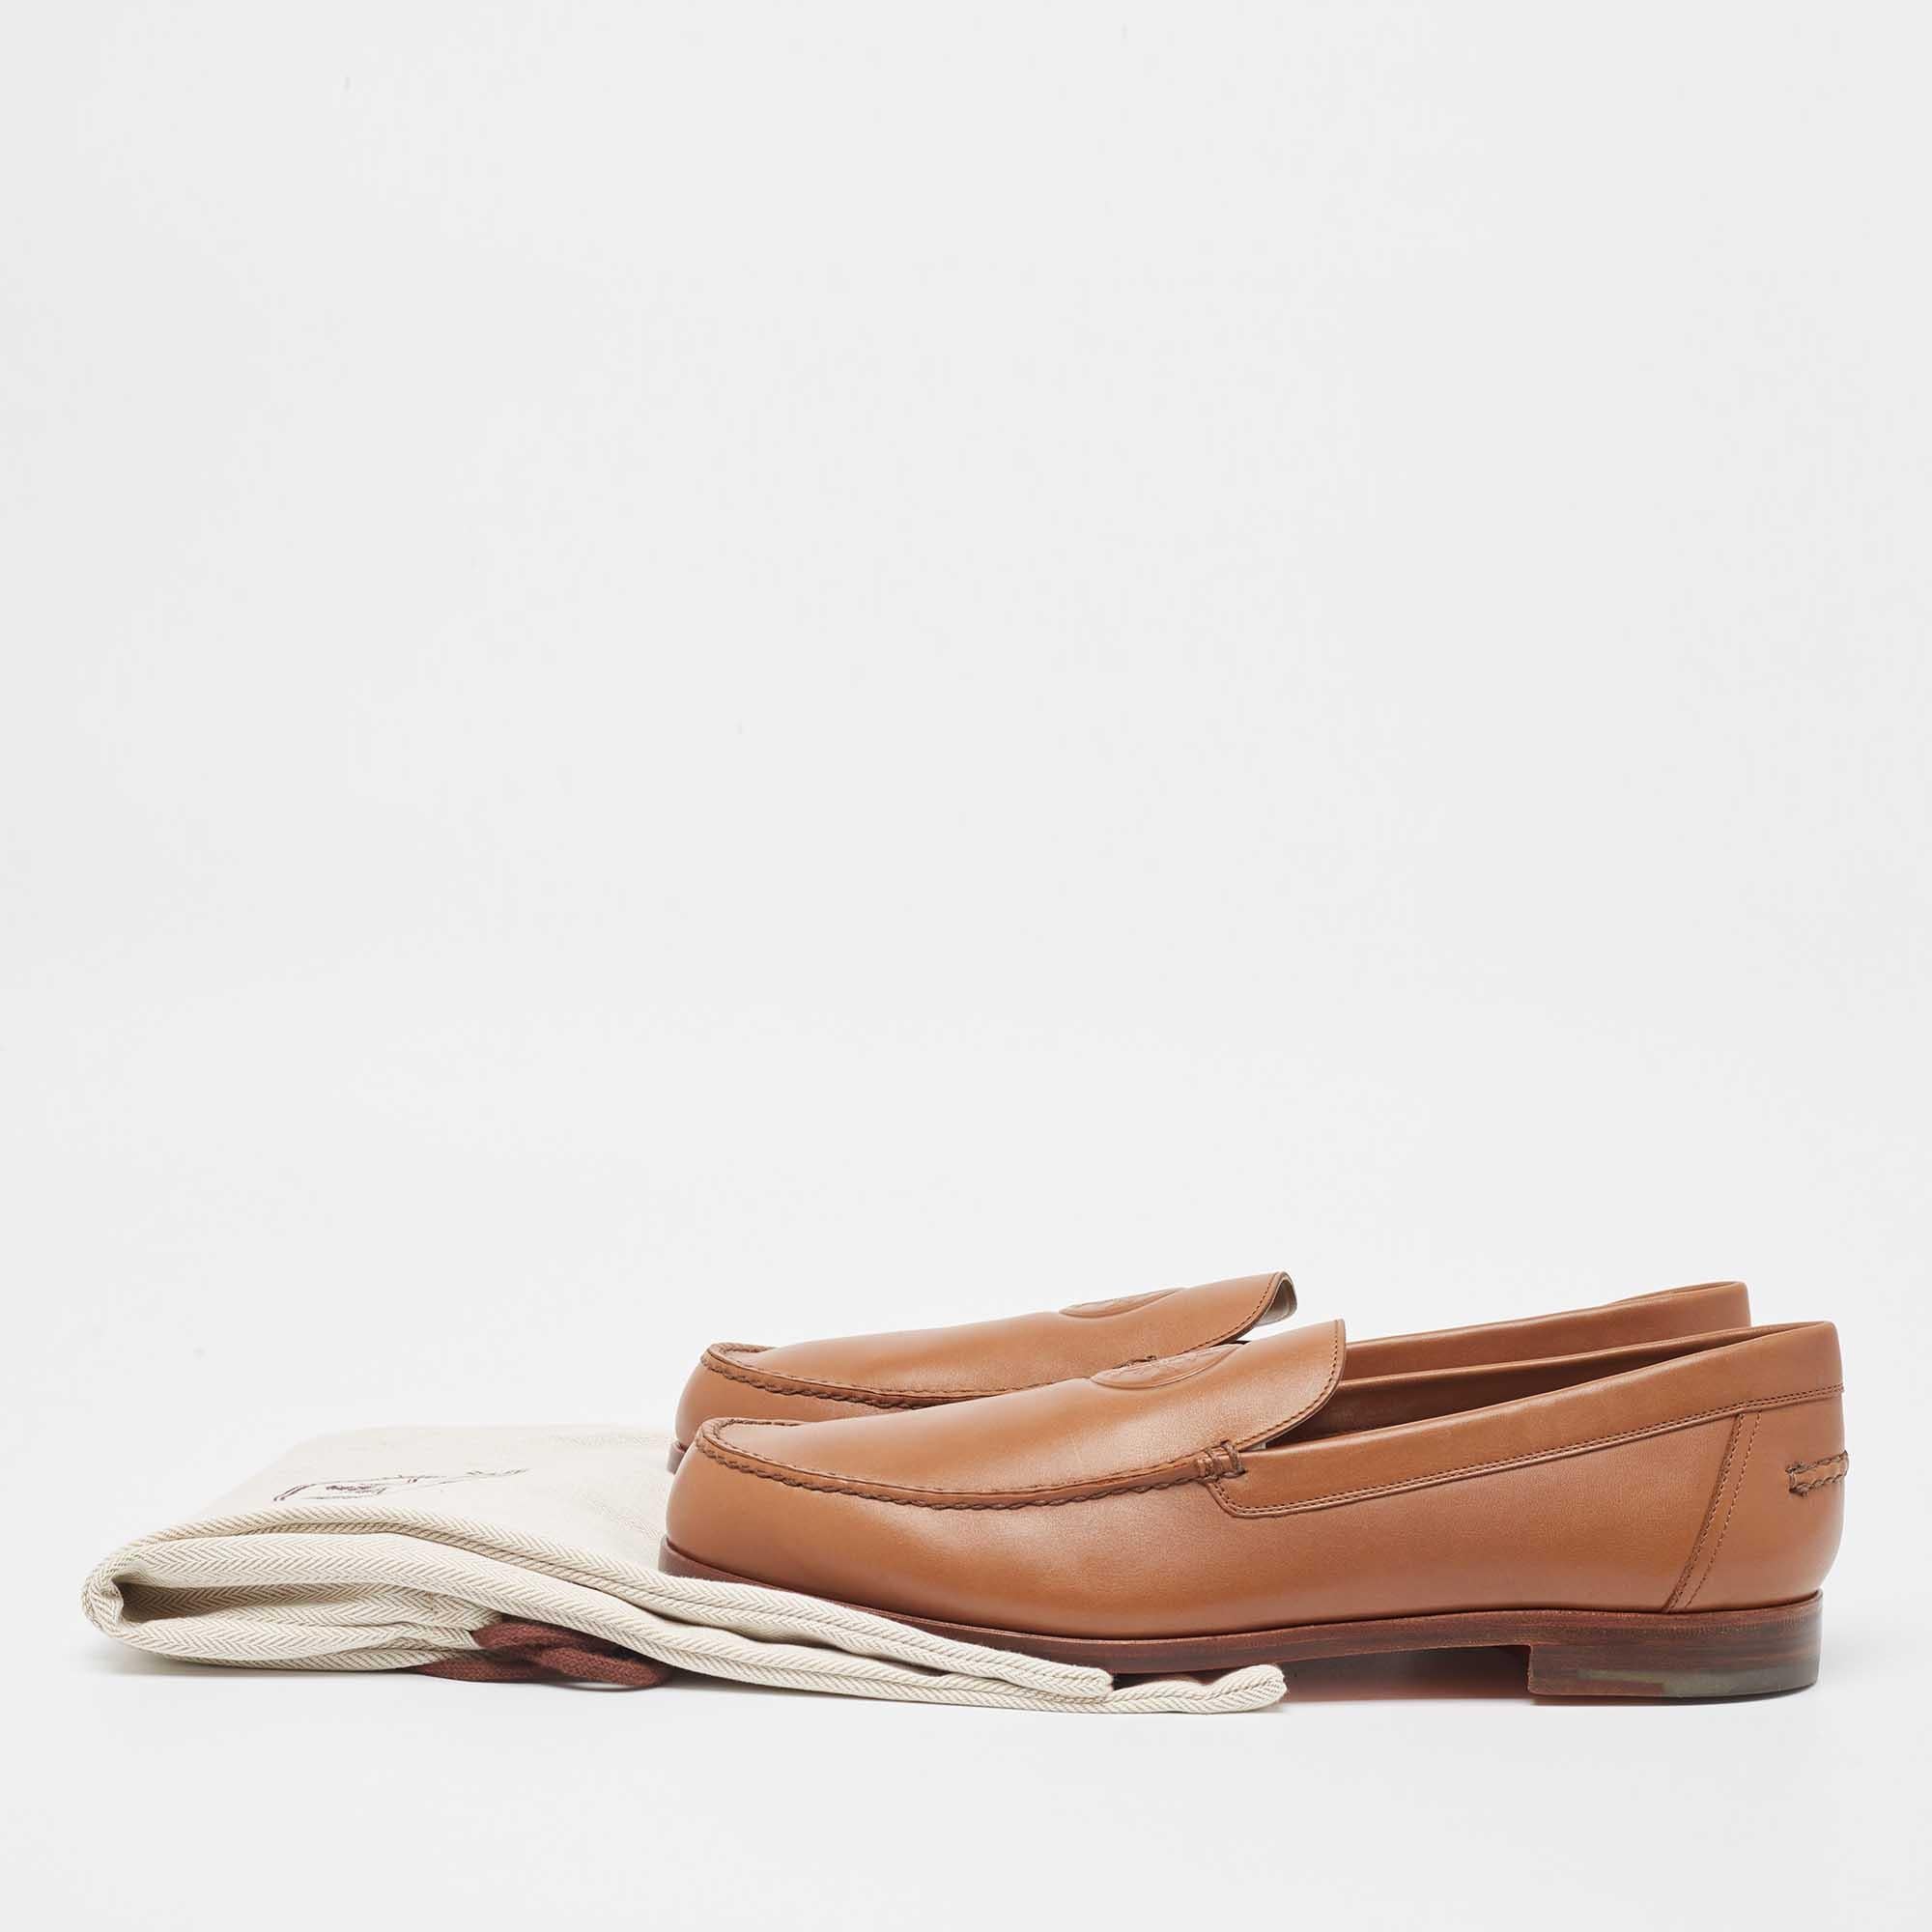 Hermès Brown Leather Slip On Loafers Size 44 5